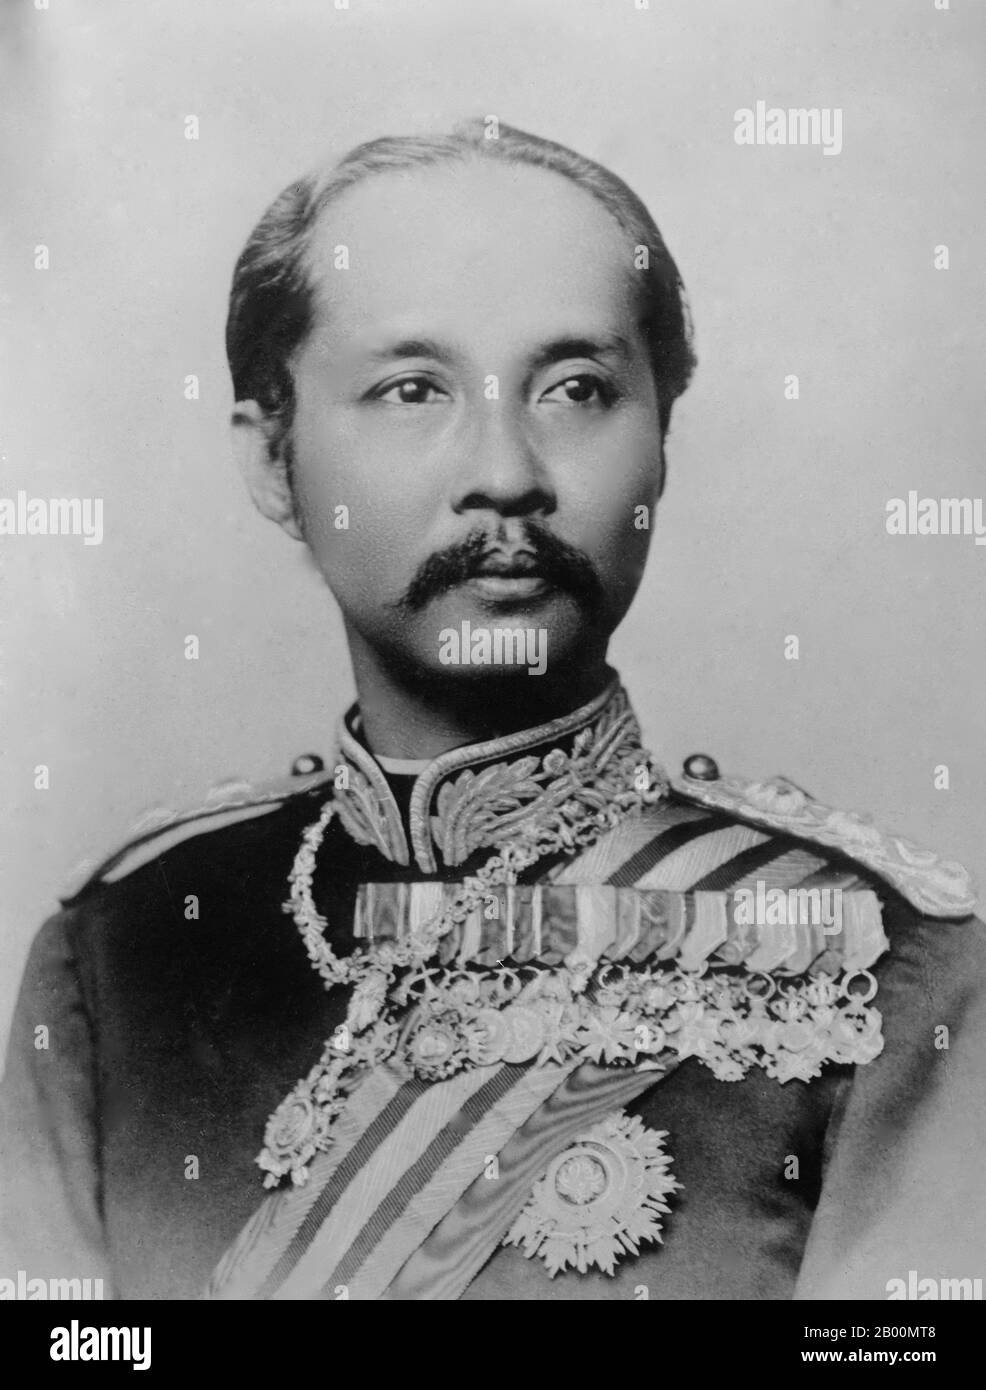 Thailand: King Rama V, Chulalongkorn (1 October 1868 – 23 October 1910), 5th monarch of the Chakri Dynasty.  Phra Bat Somdet Phra Poramintharamaha Chulalongkorn Phra Chunla Chom Klao Chao Yu Hua, or Rama V (20 September 1853 – 23 October 1910) was the fifth monarch of Siam under the House of Chakri. He is considered one of the greatest kings of Siam. His reign was characterized by the modernization of Siam, immense government and social reforms, and territorial cessions to the British Empire and French Indochina. Chulalongkorn, through his policies, managed to save Siam from being colonised. Stock Photo